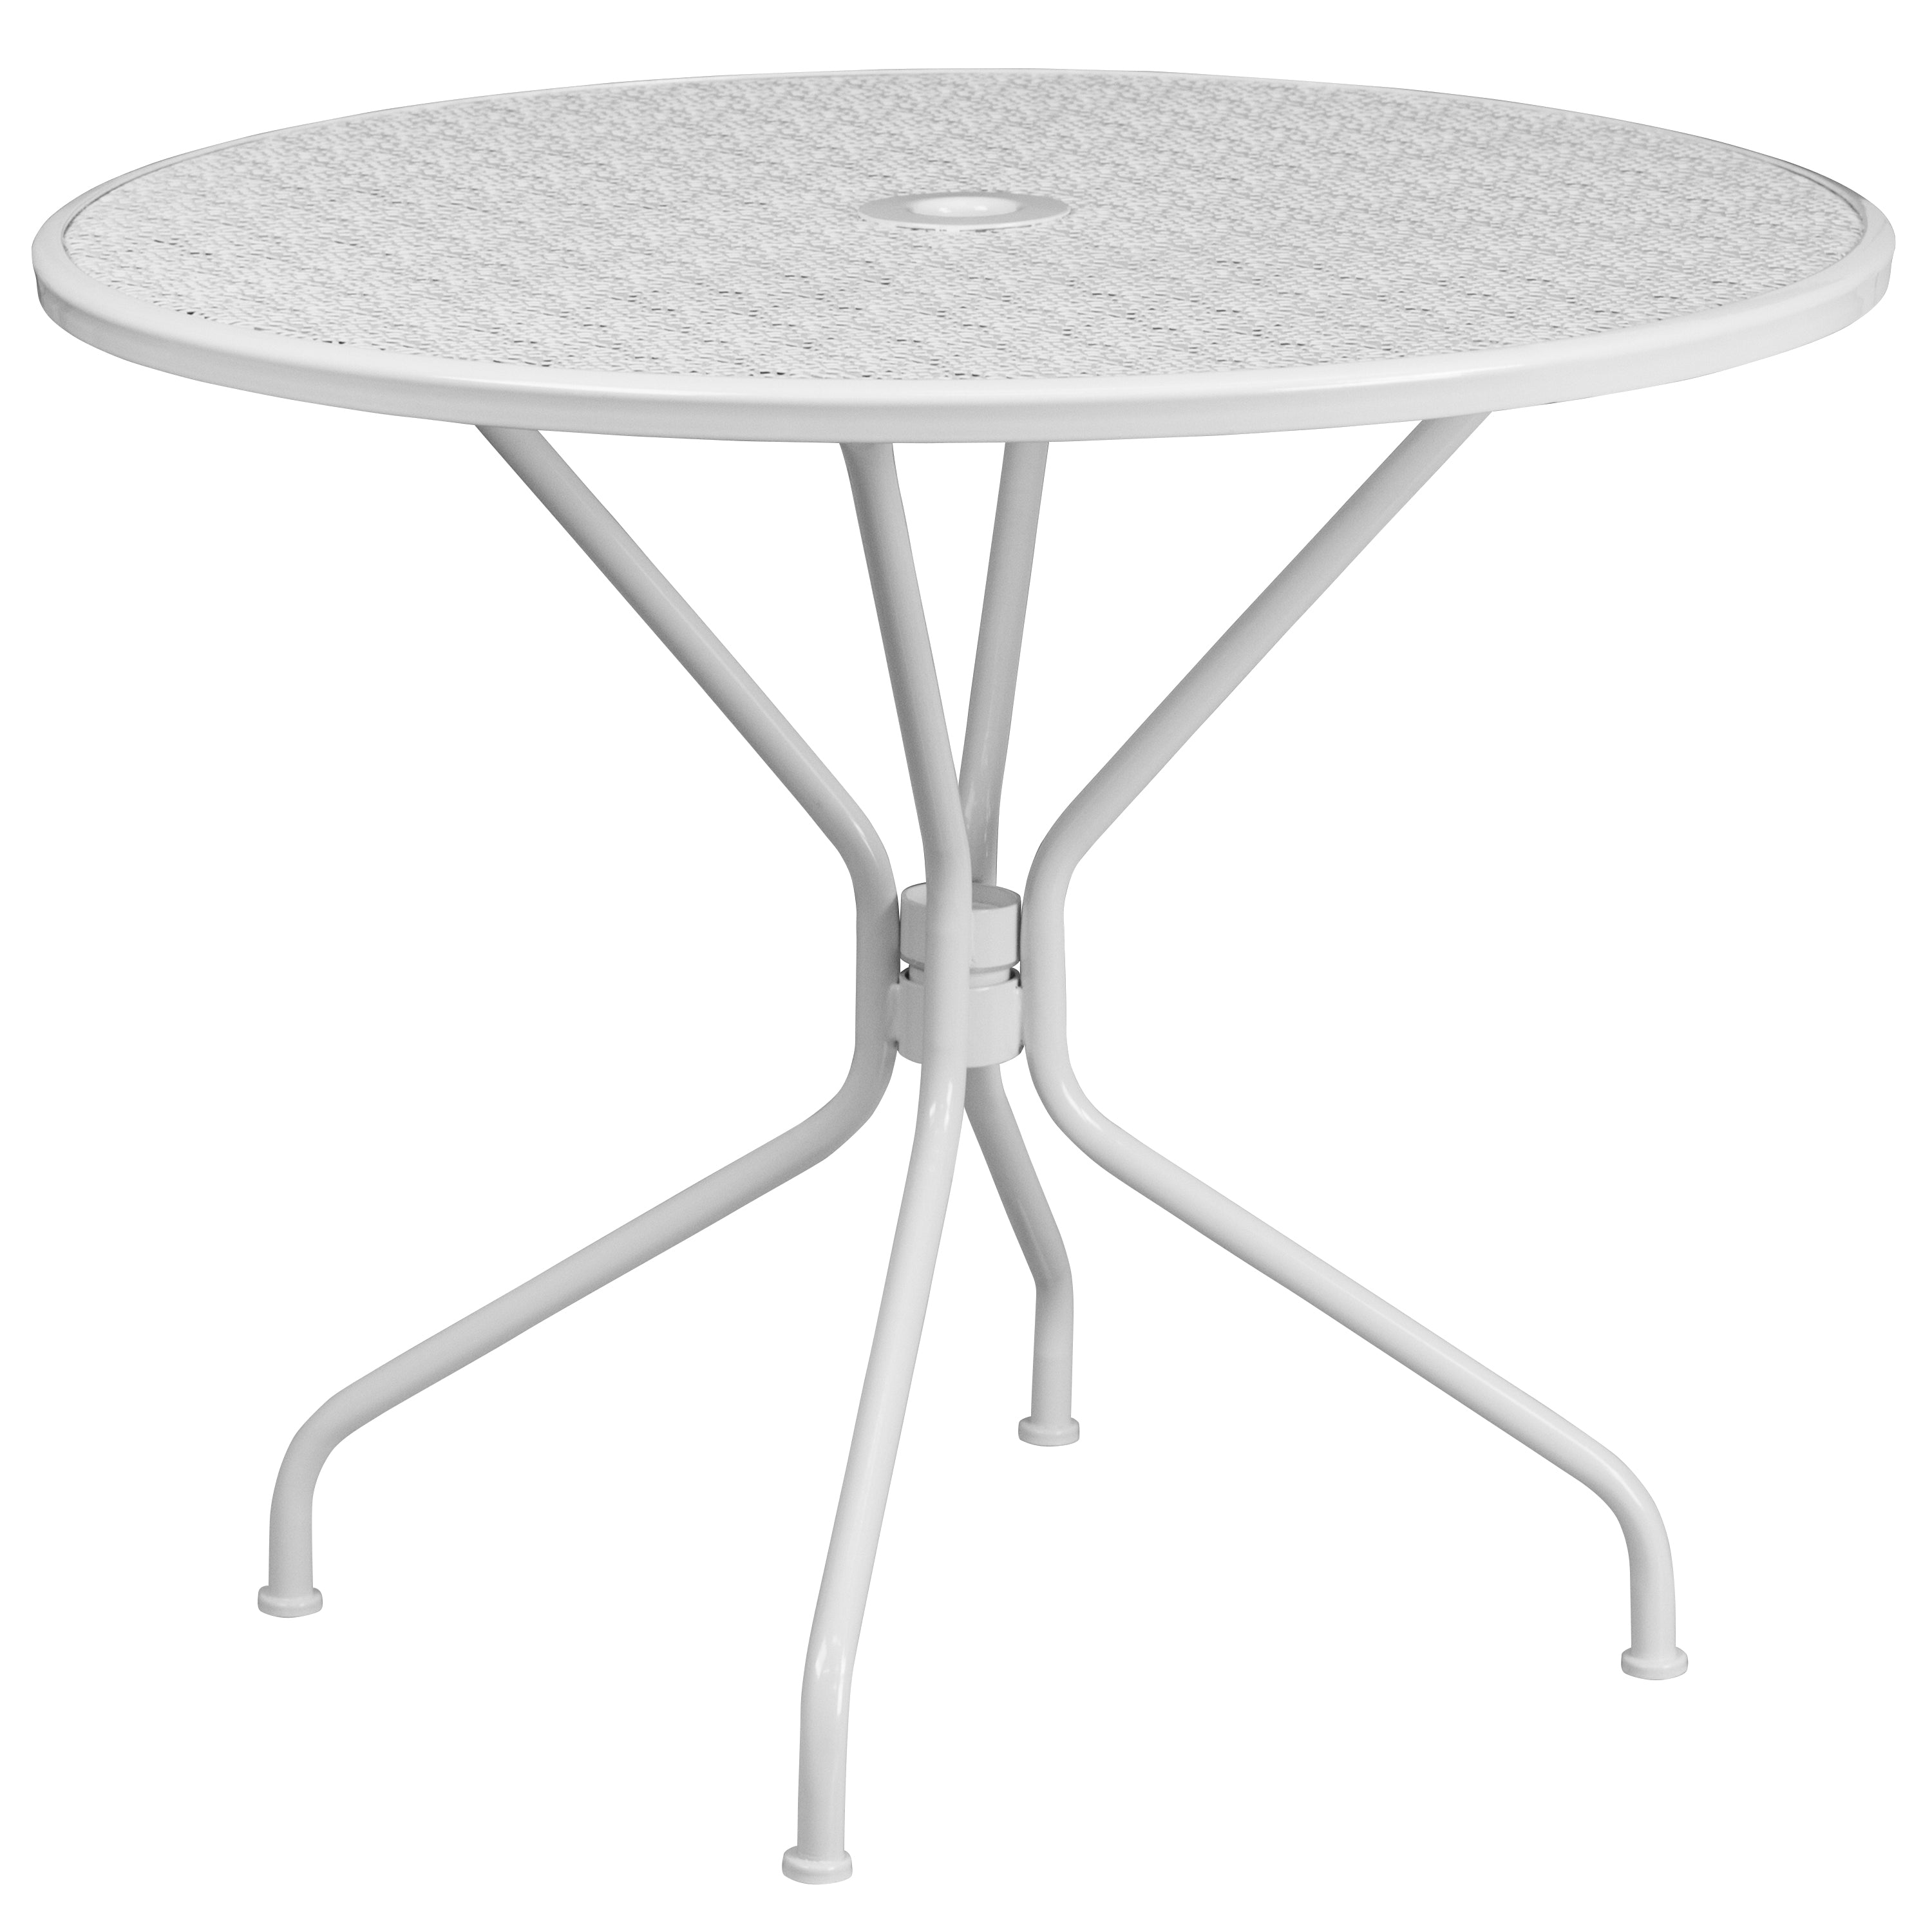 Oia Commercial Grade 35.25" Round Indoor-Outdoor Steel Patio Table Set with 2 Square Back Chairs-Indoor/Outdoor Dining Sets-Flash Furniture-Wall2Wall Furnishings